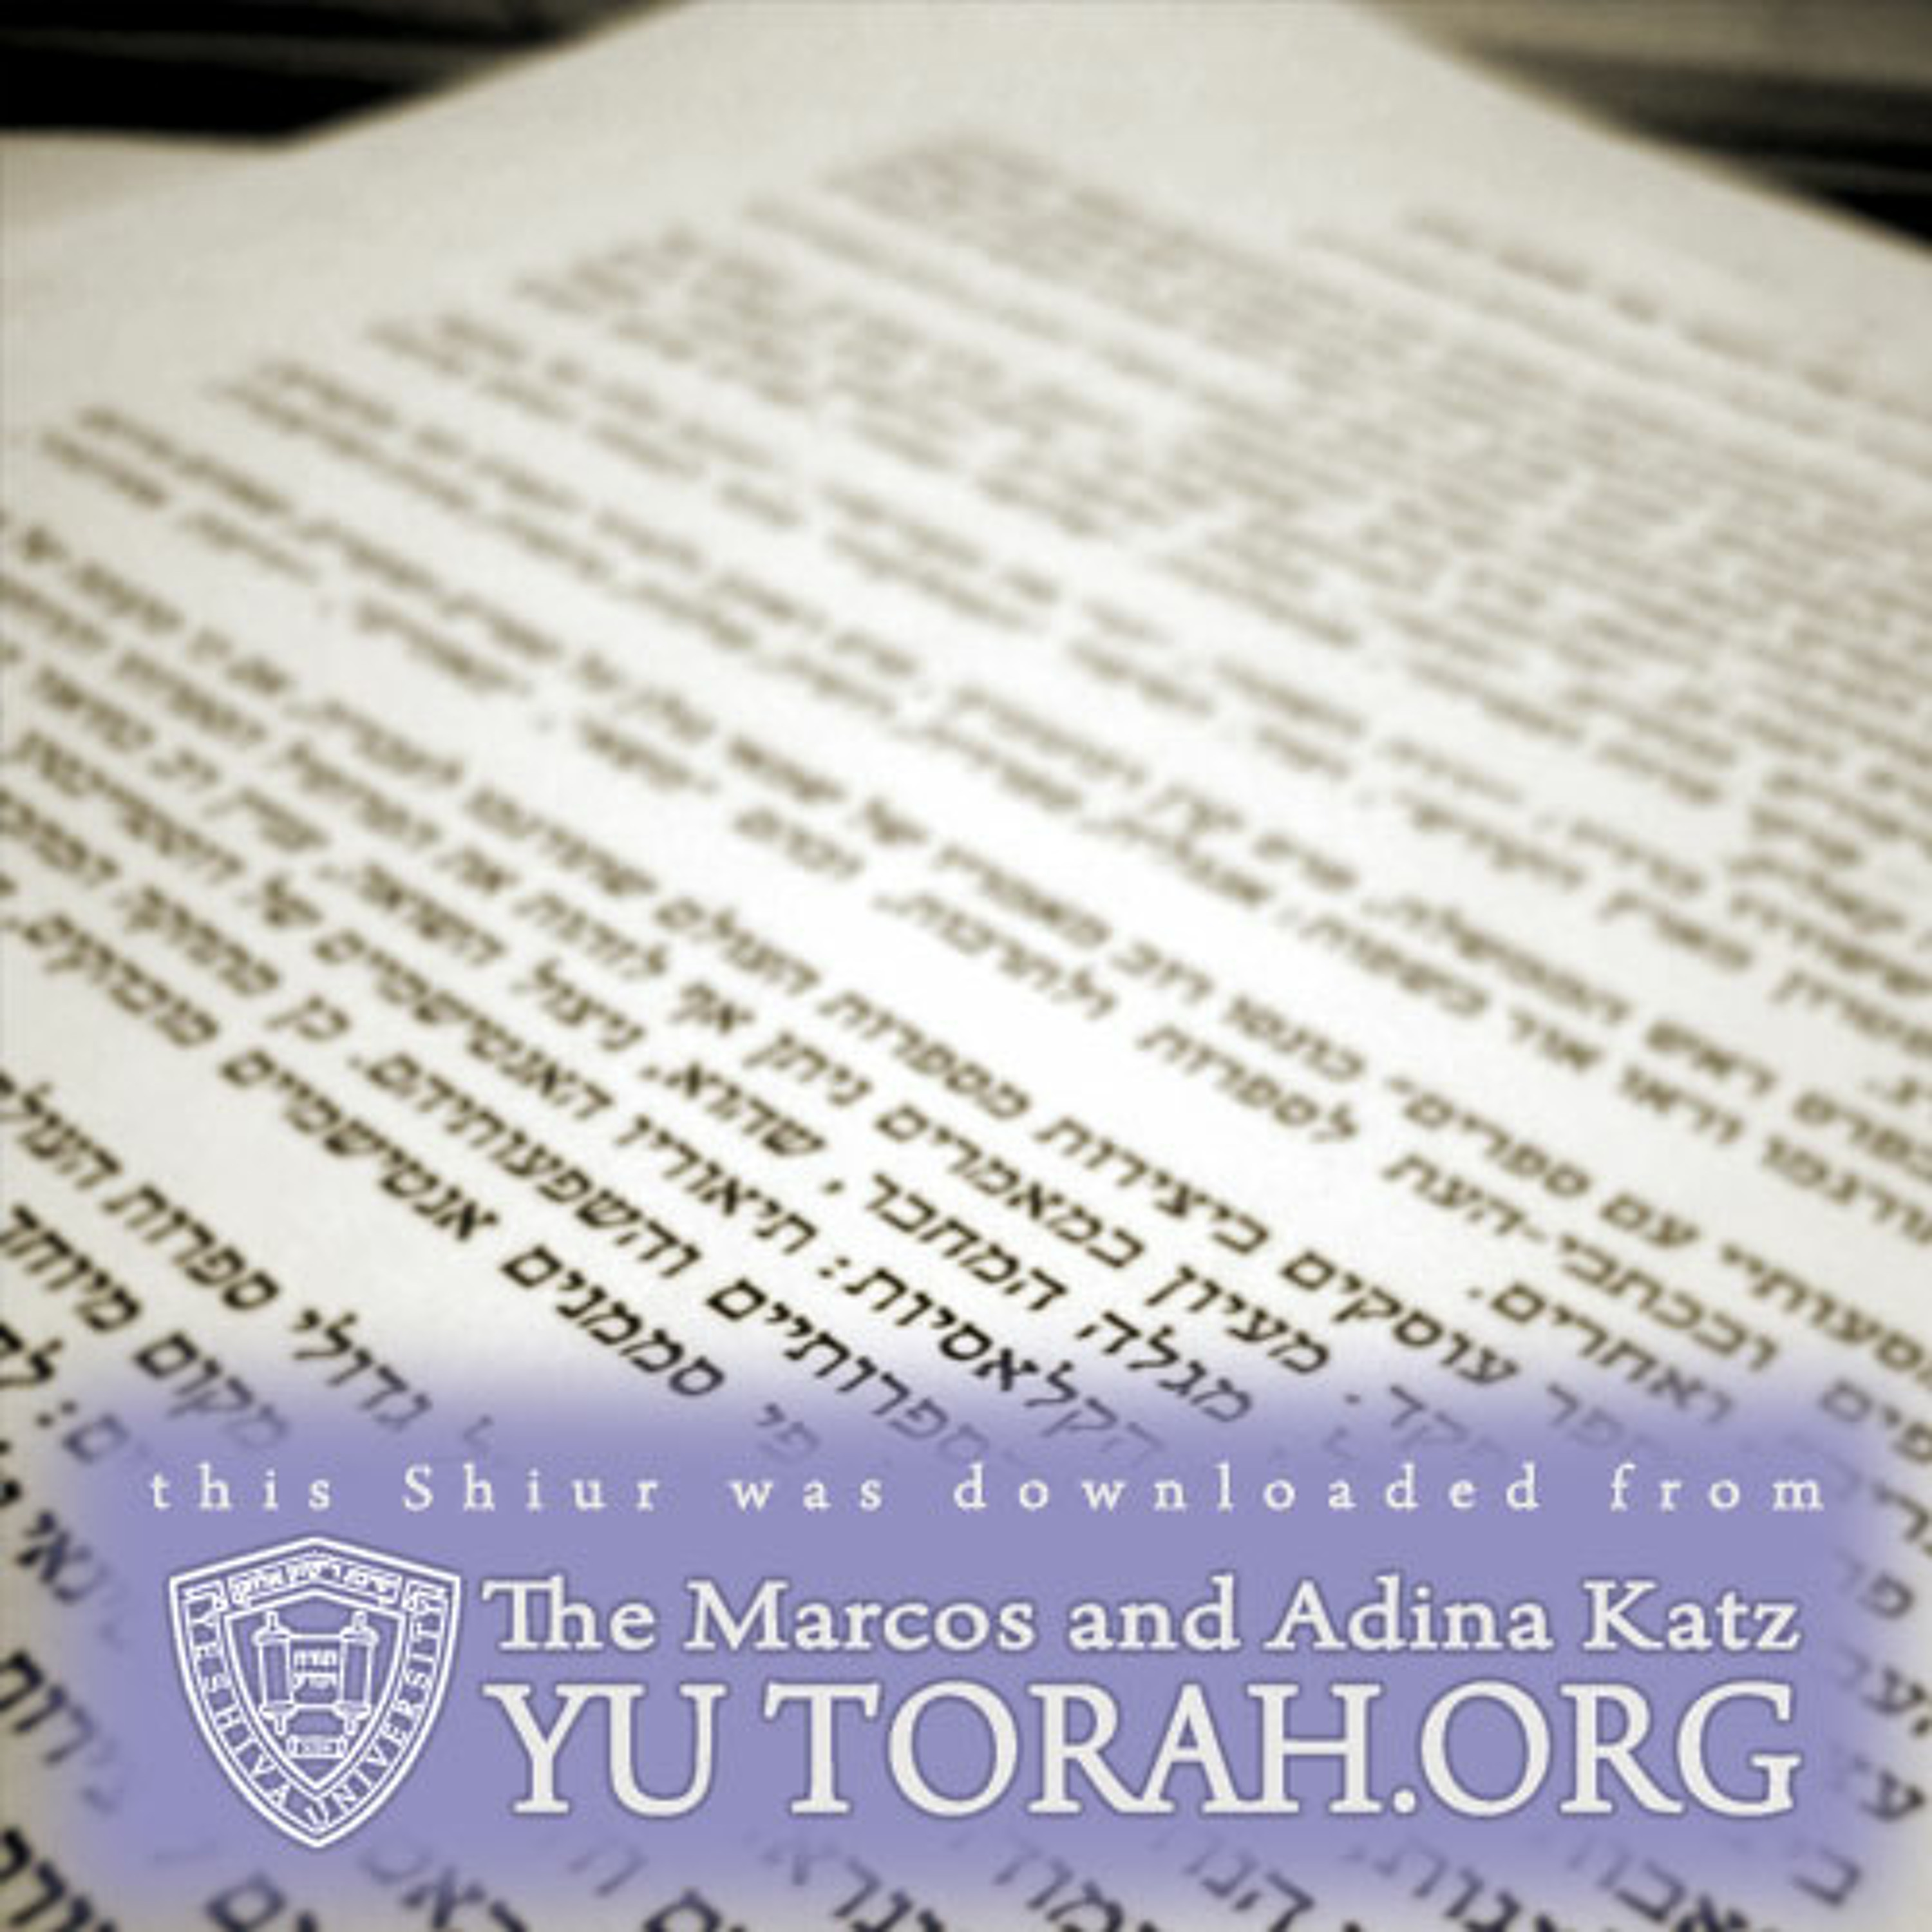 The Synthesis of Torah and Chochma